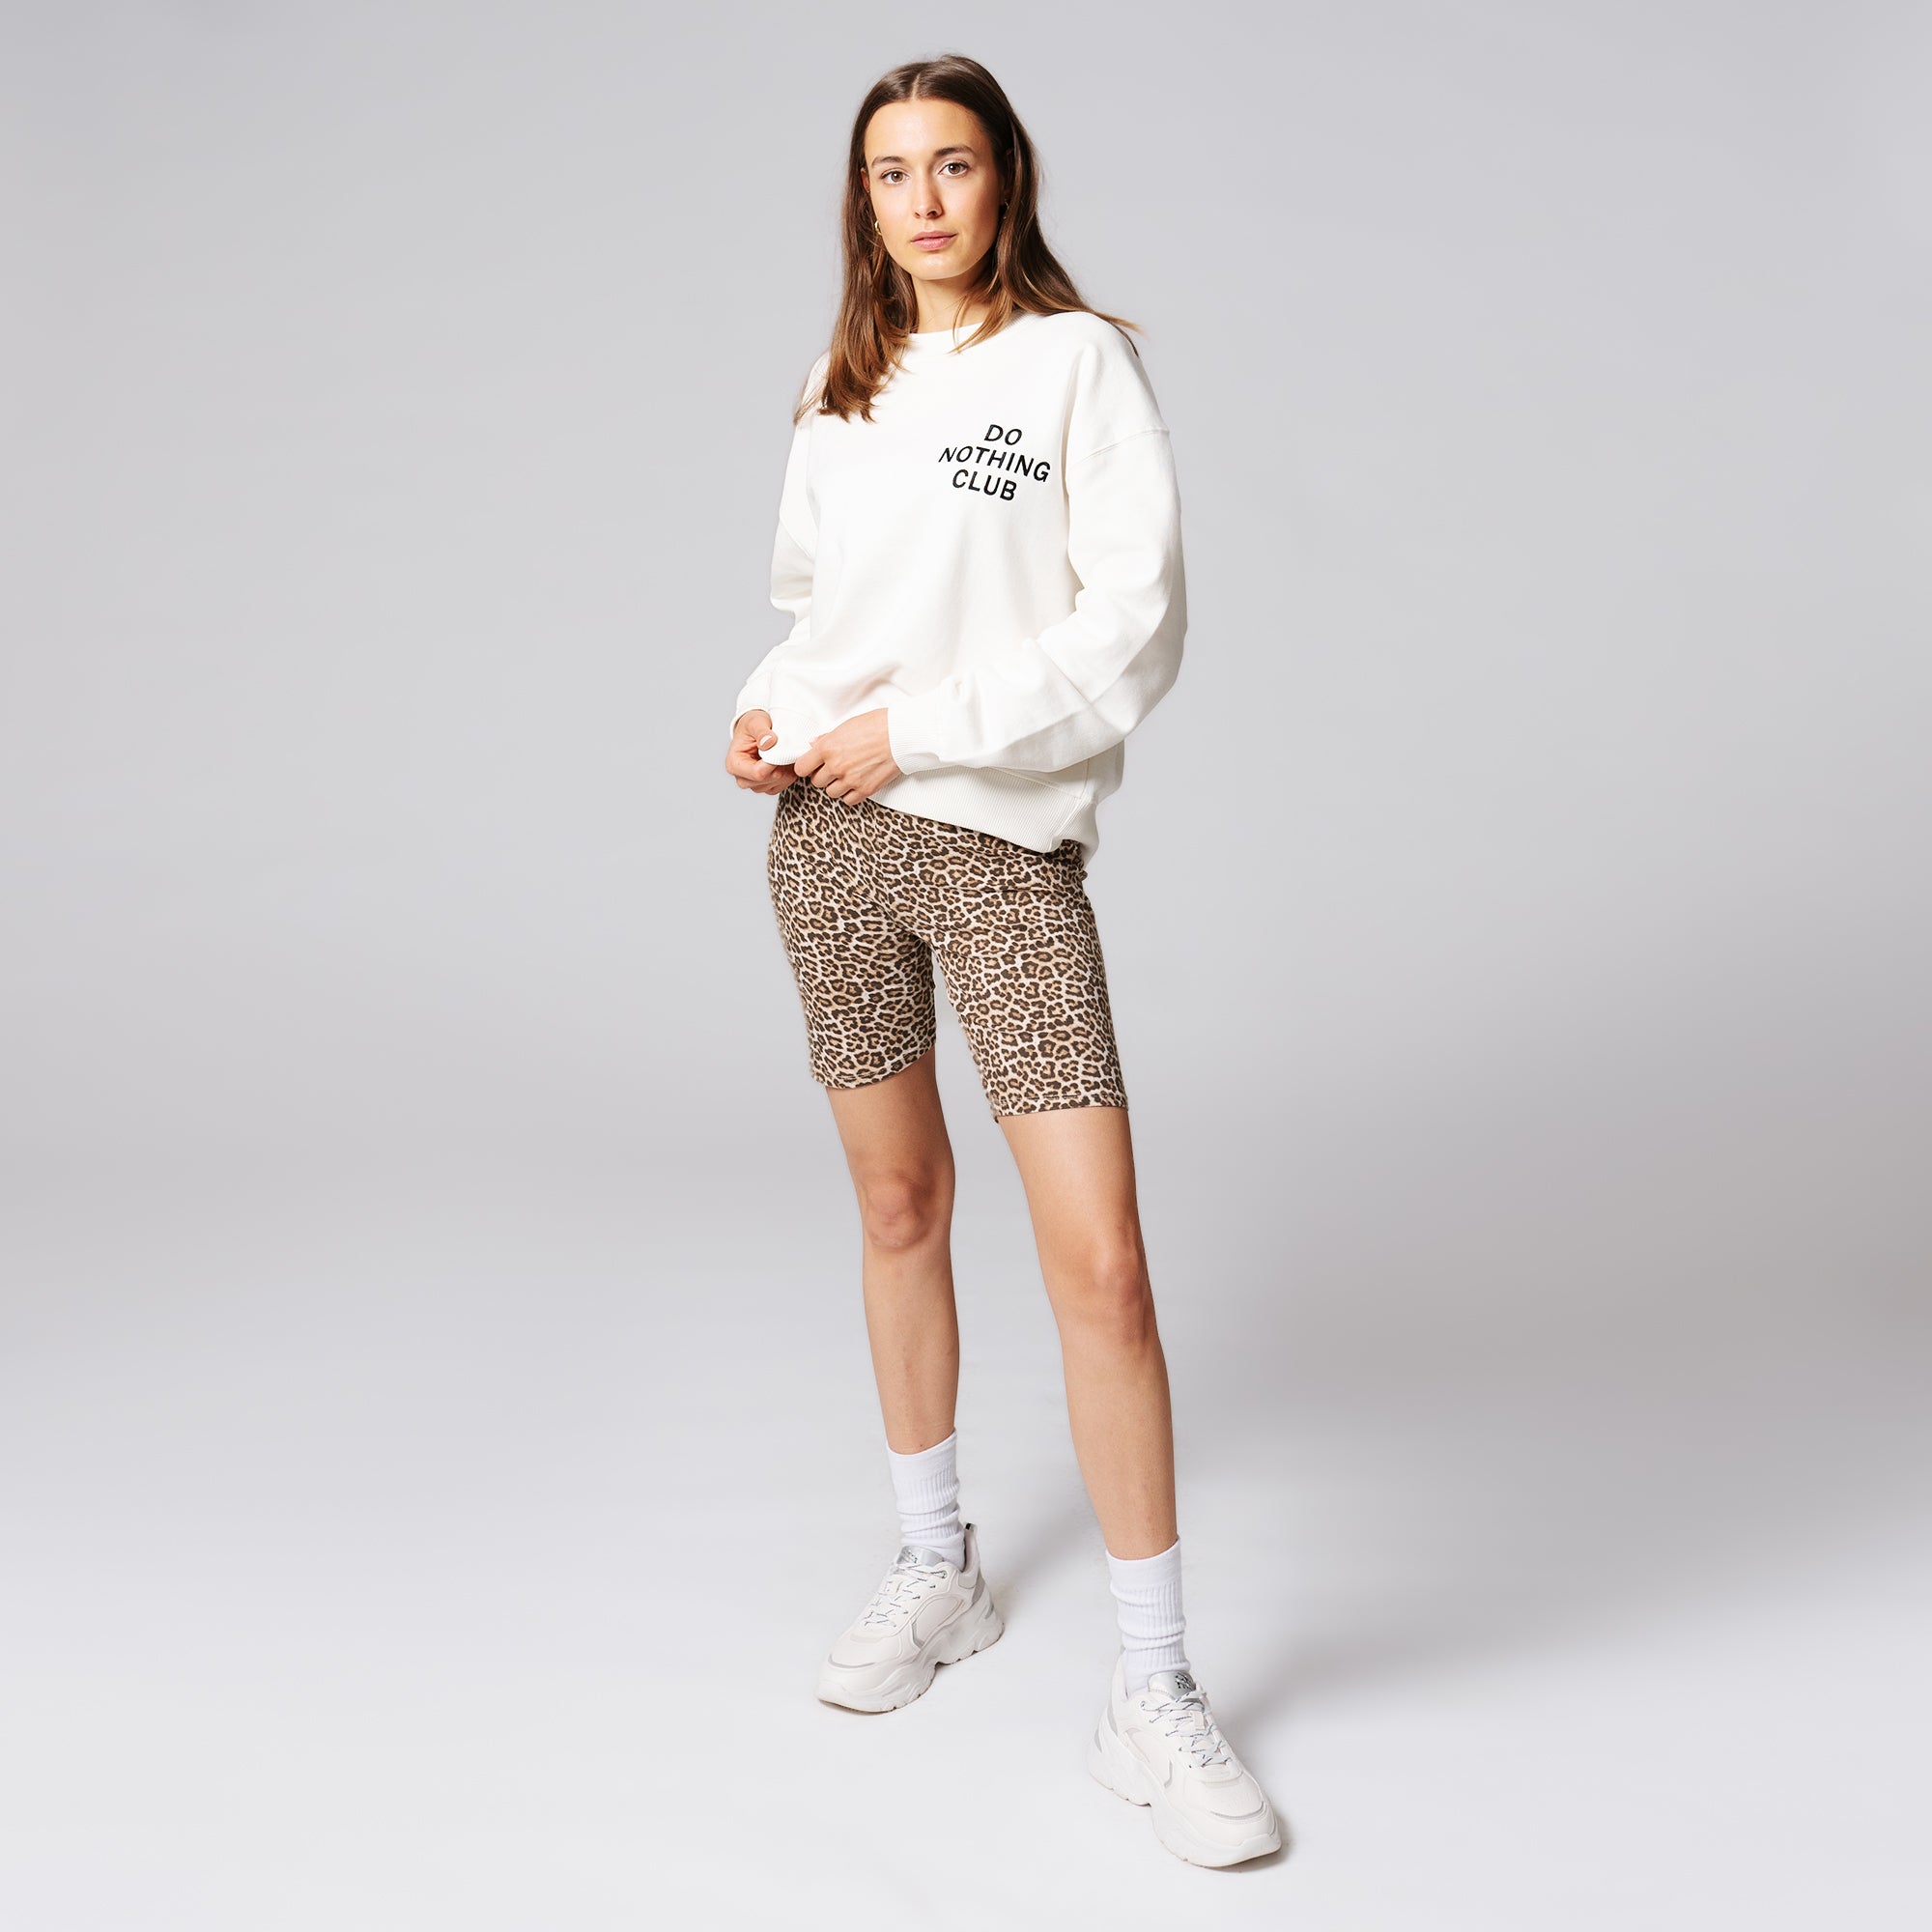 On Vacation Ladies Sweater "Do Nothing Club" - White